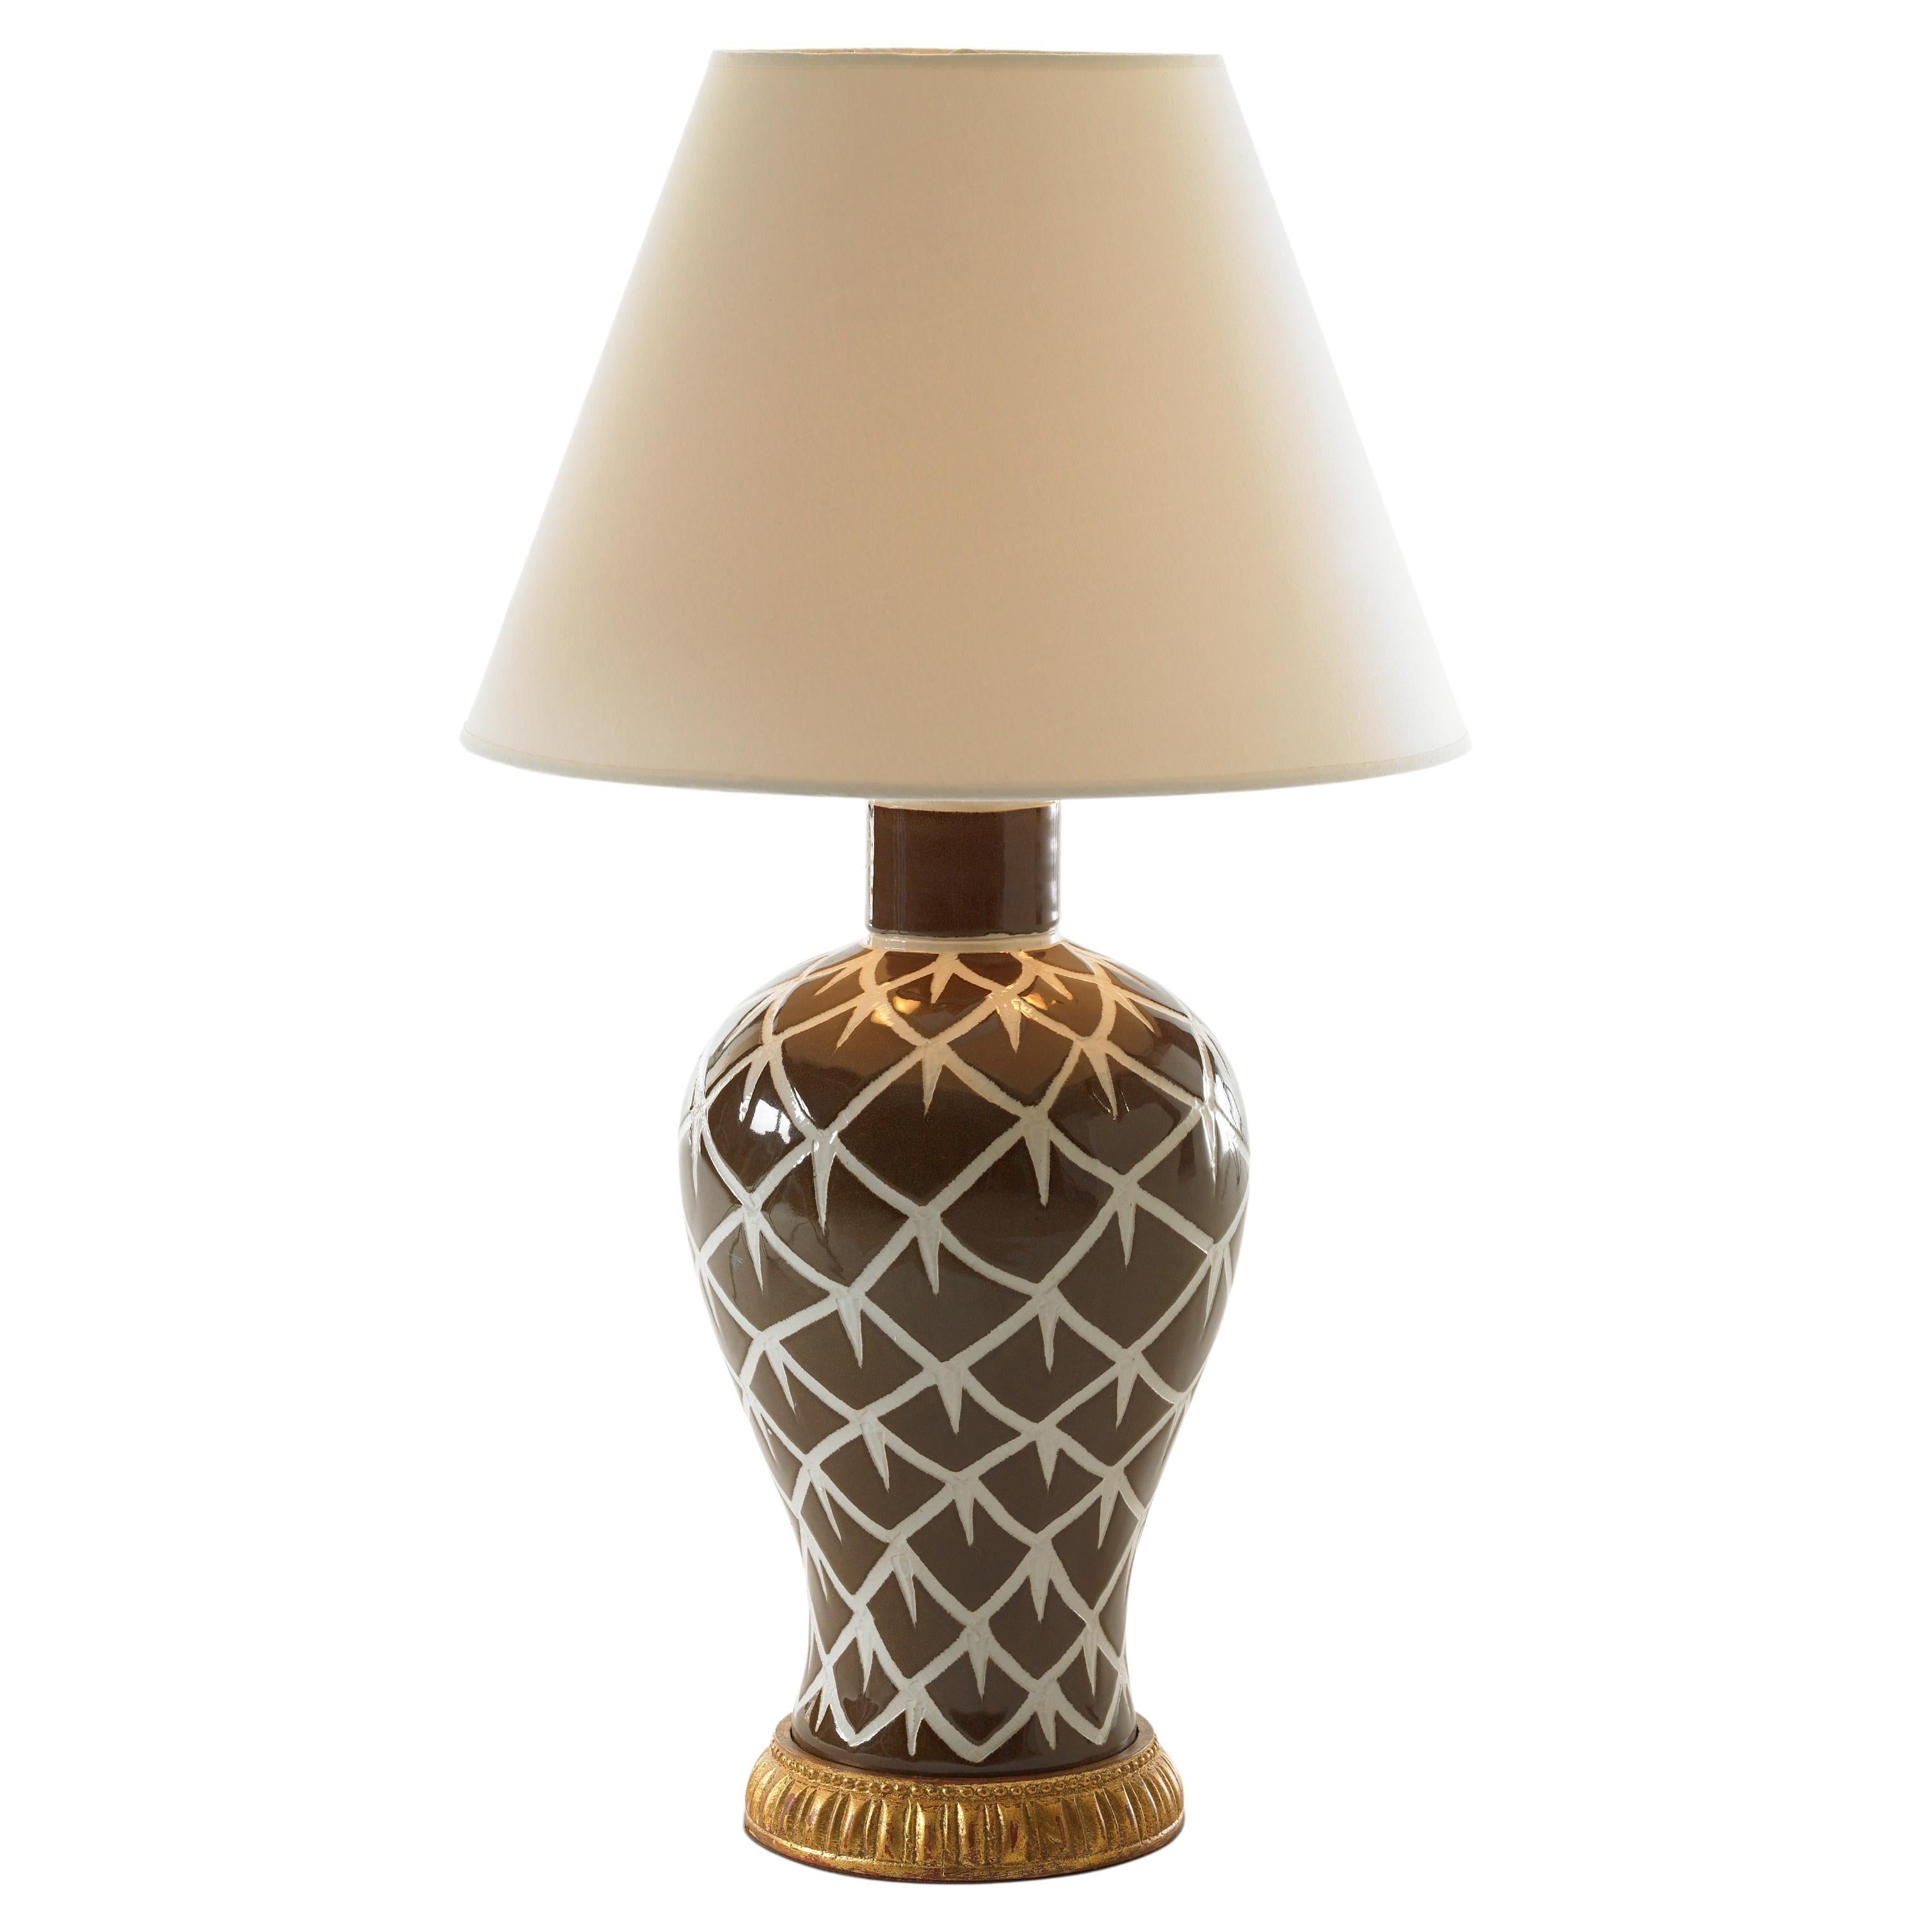 Bunny Williams Home Chicken Feather-Lampe (Braun)